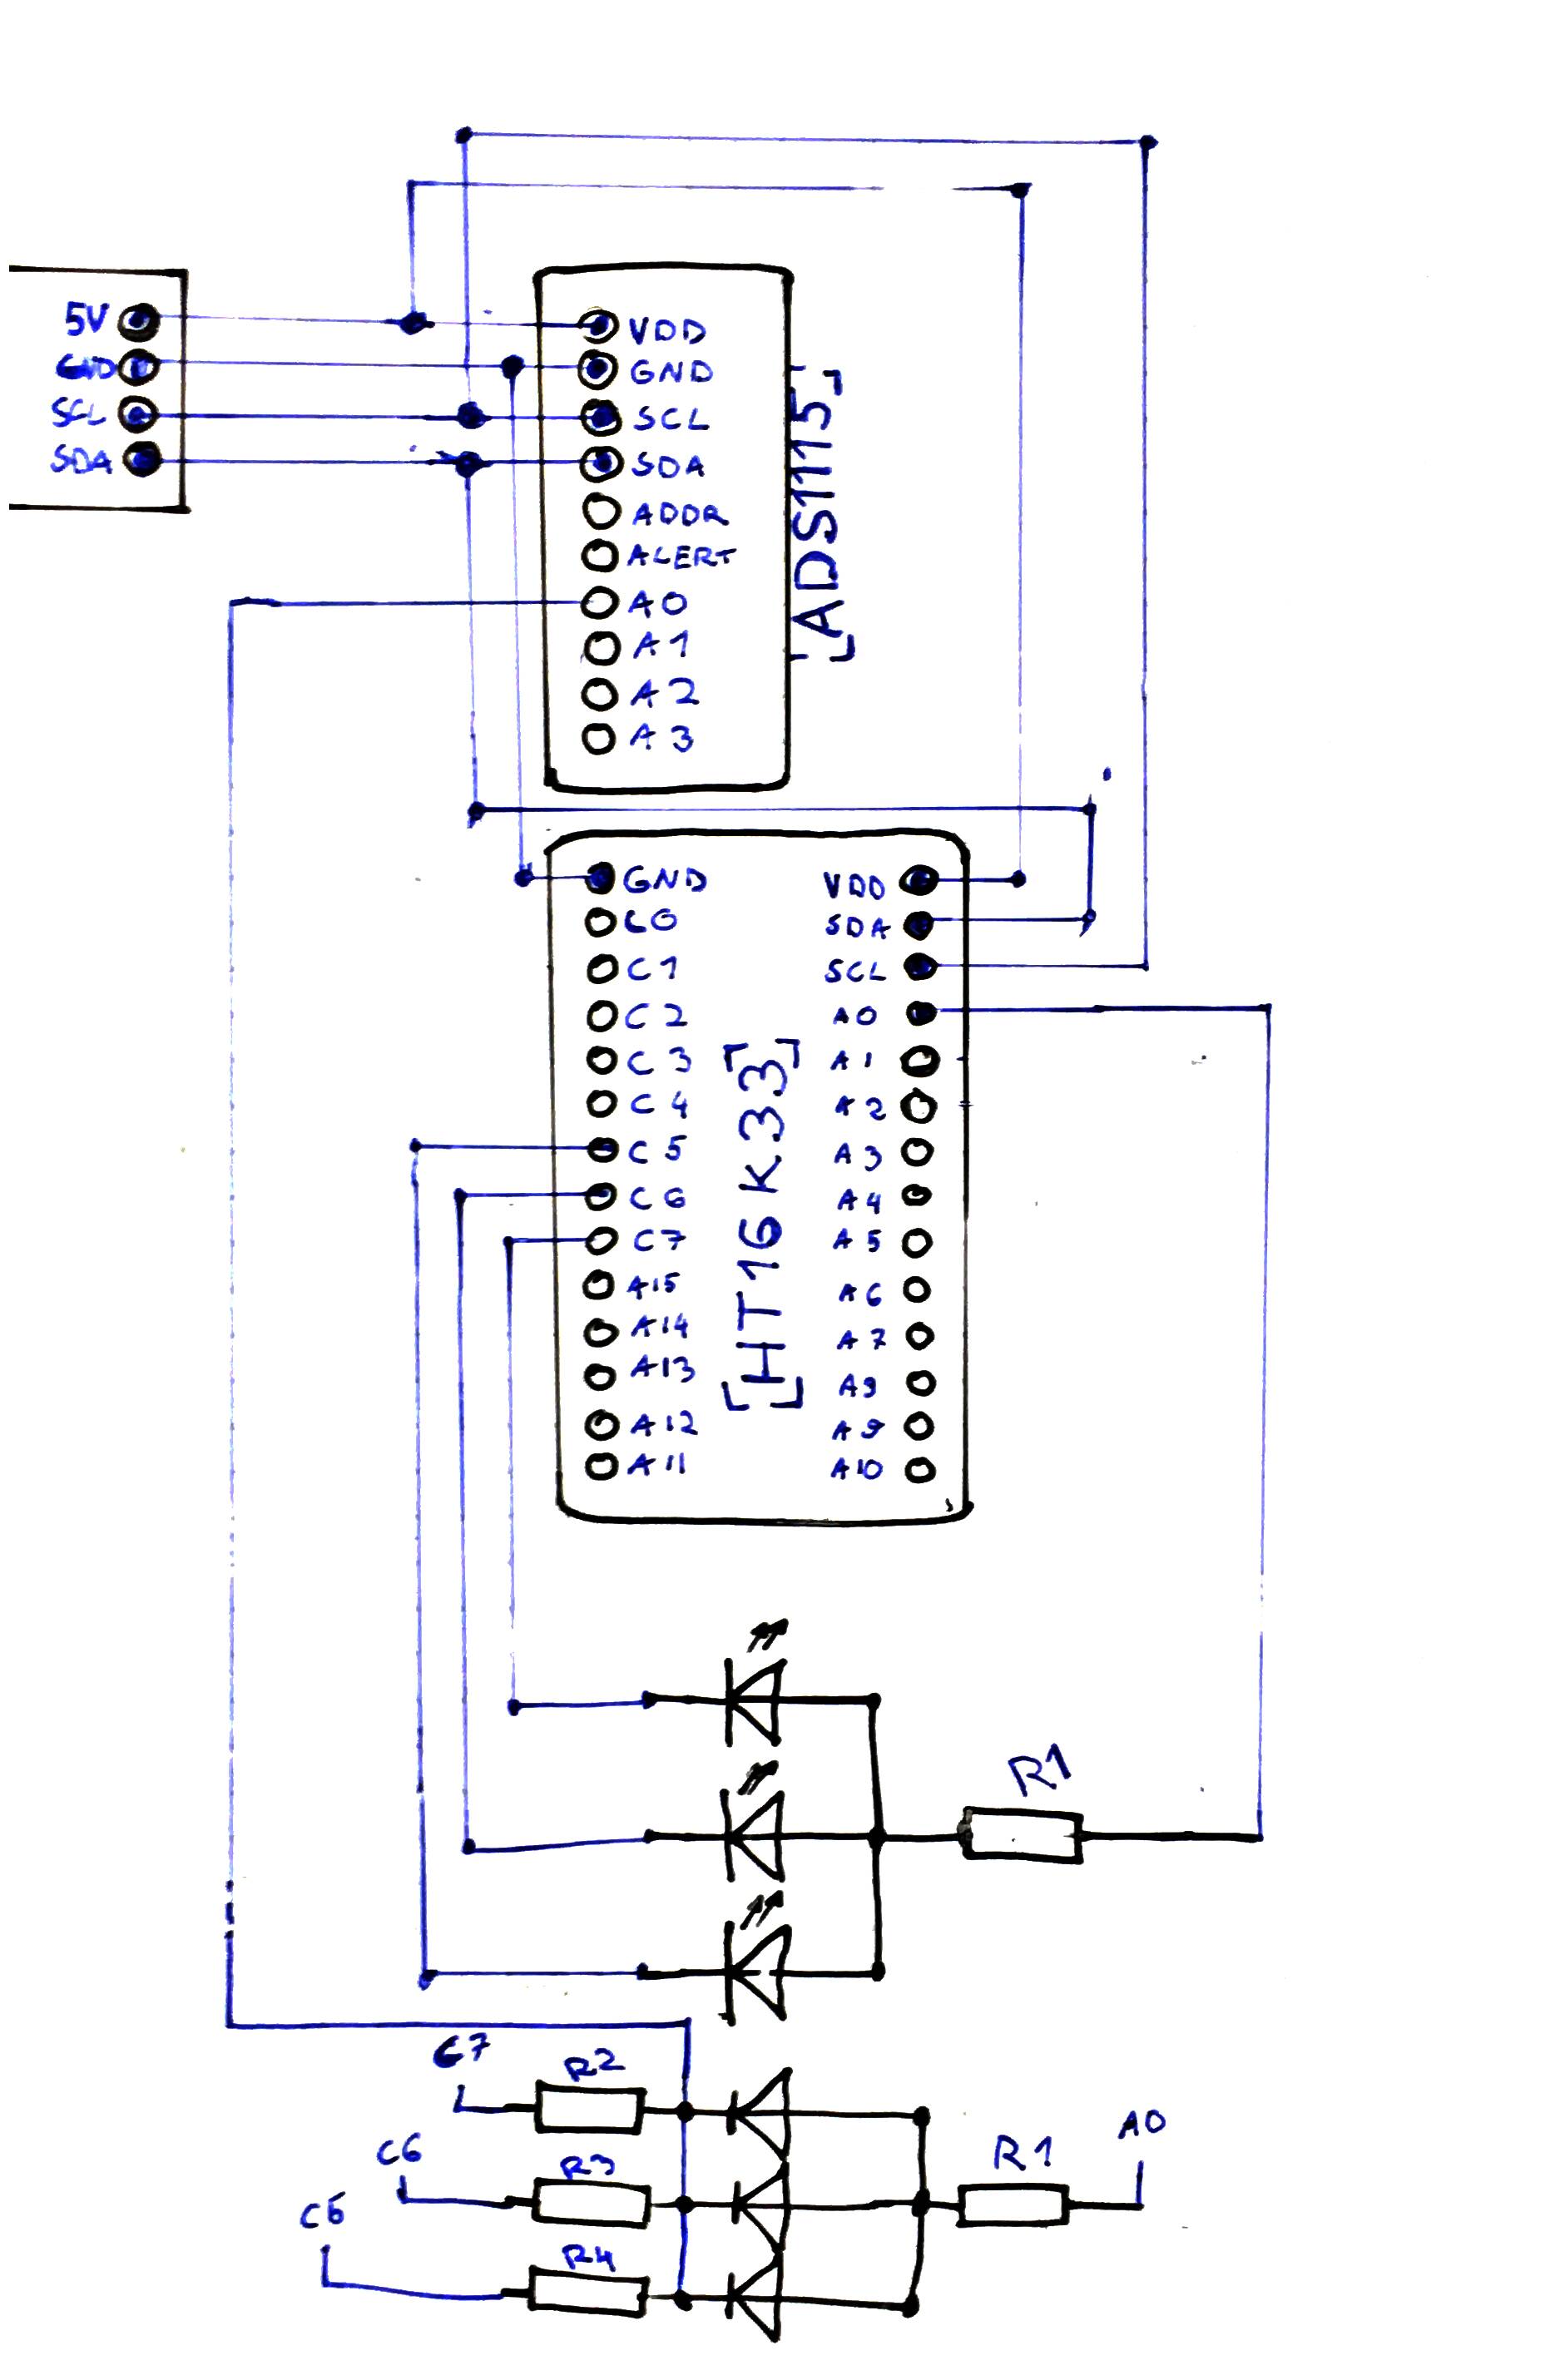 adc - Measuring resistance at every point in multiplex circuit with ...